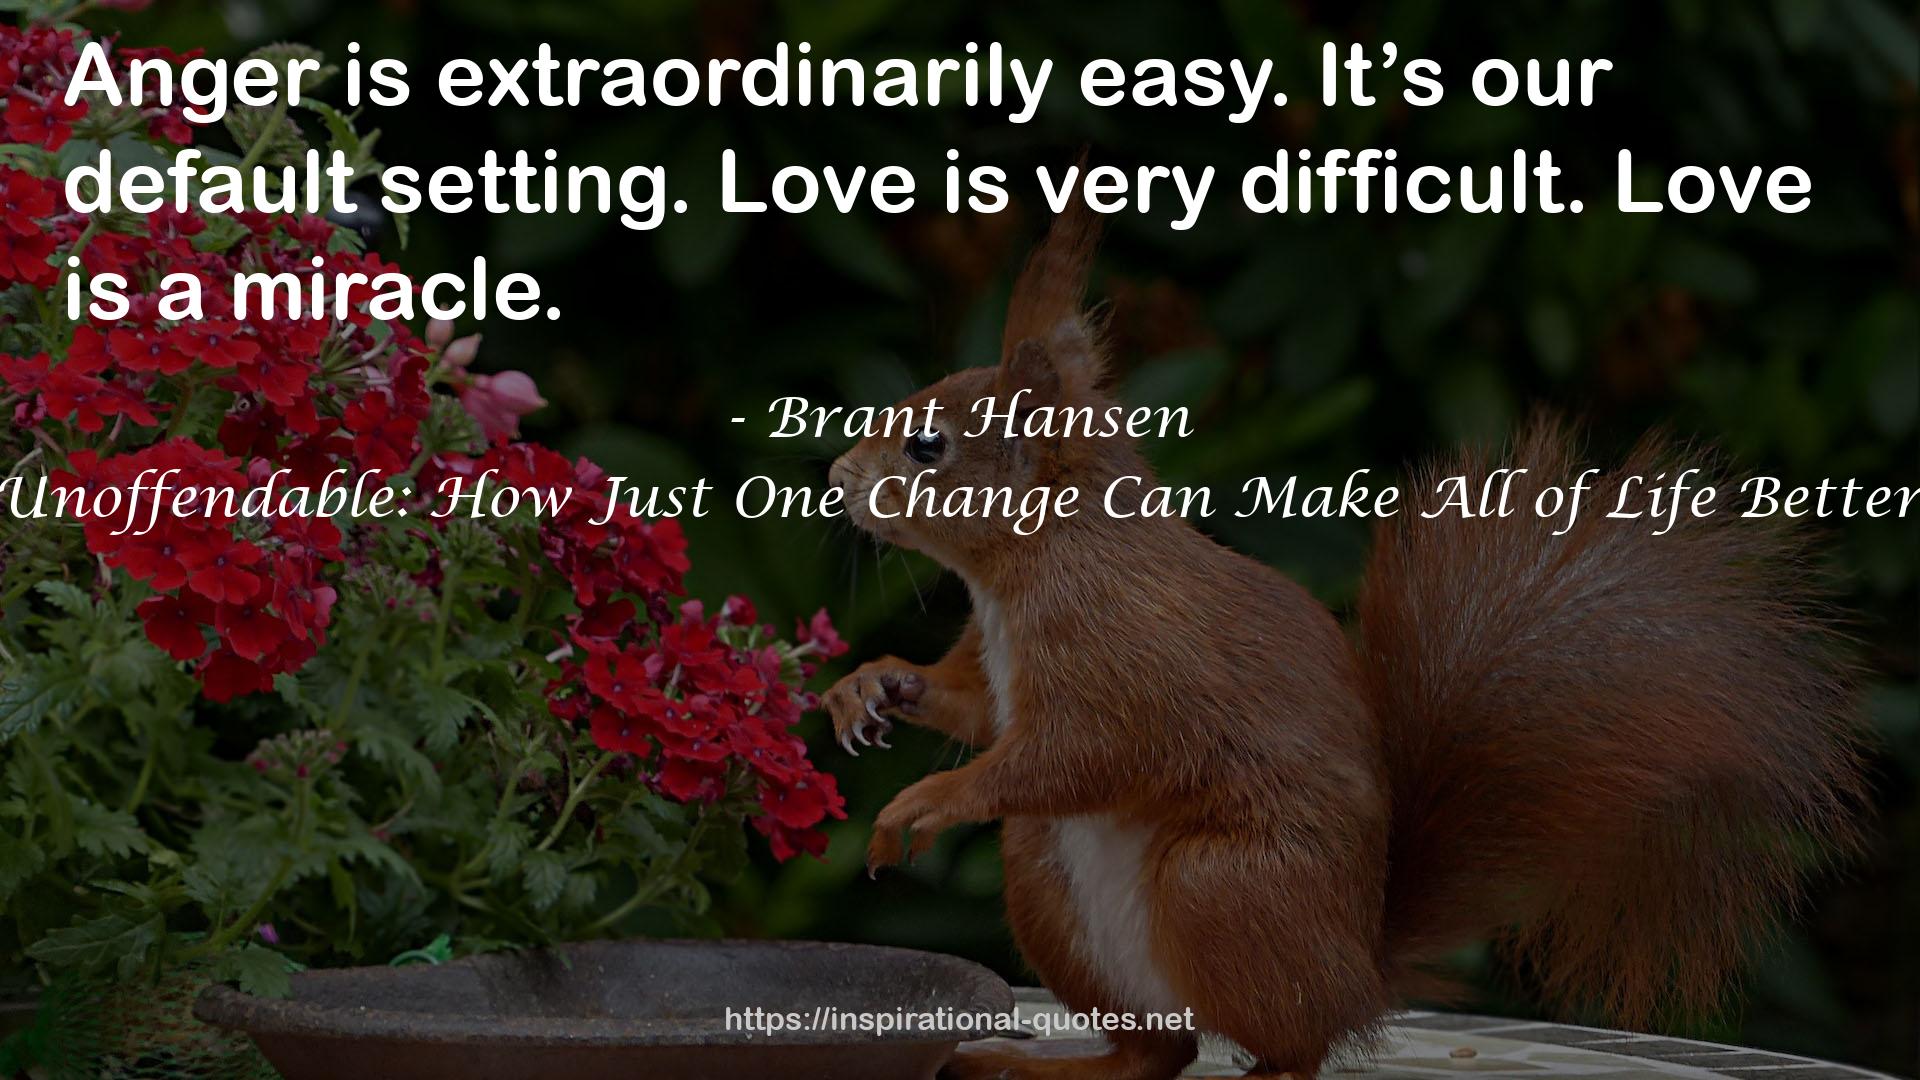 Unoffendable: How Just One Change Can Make All of Life Better QUOTES